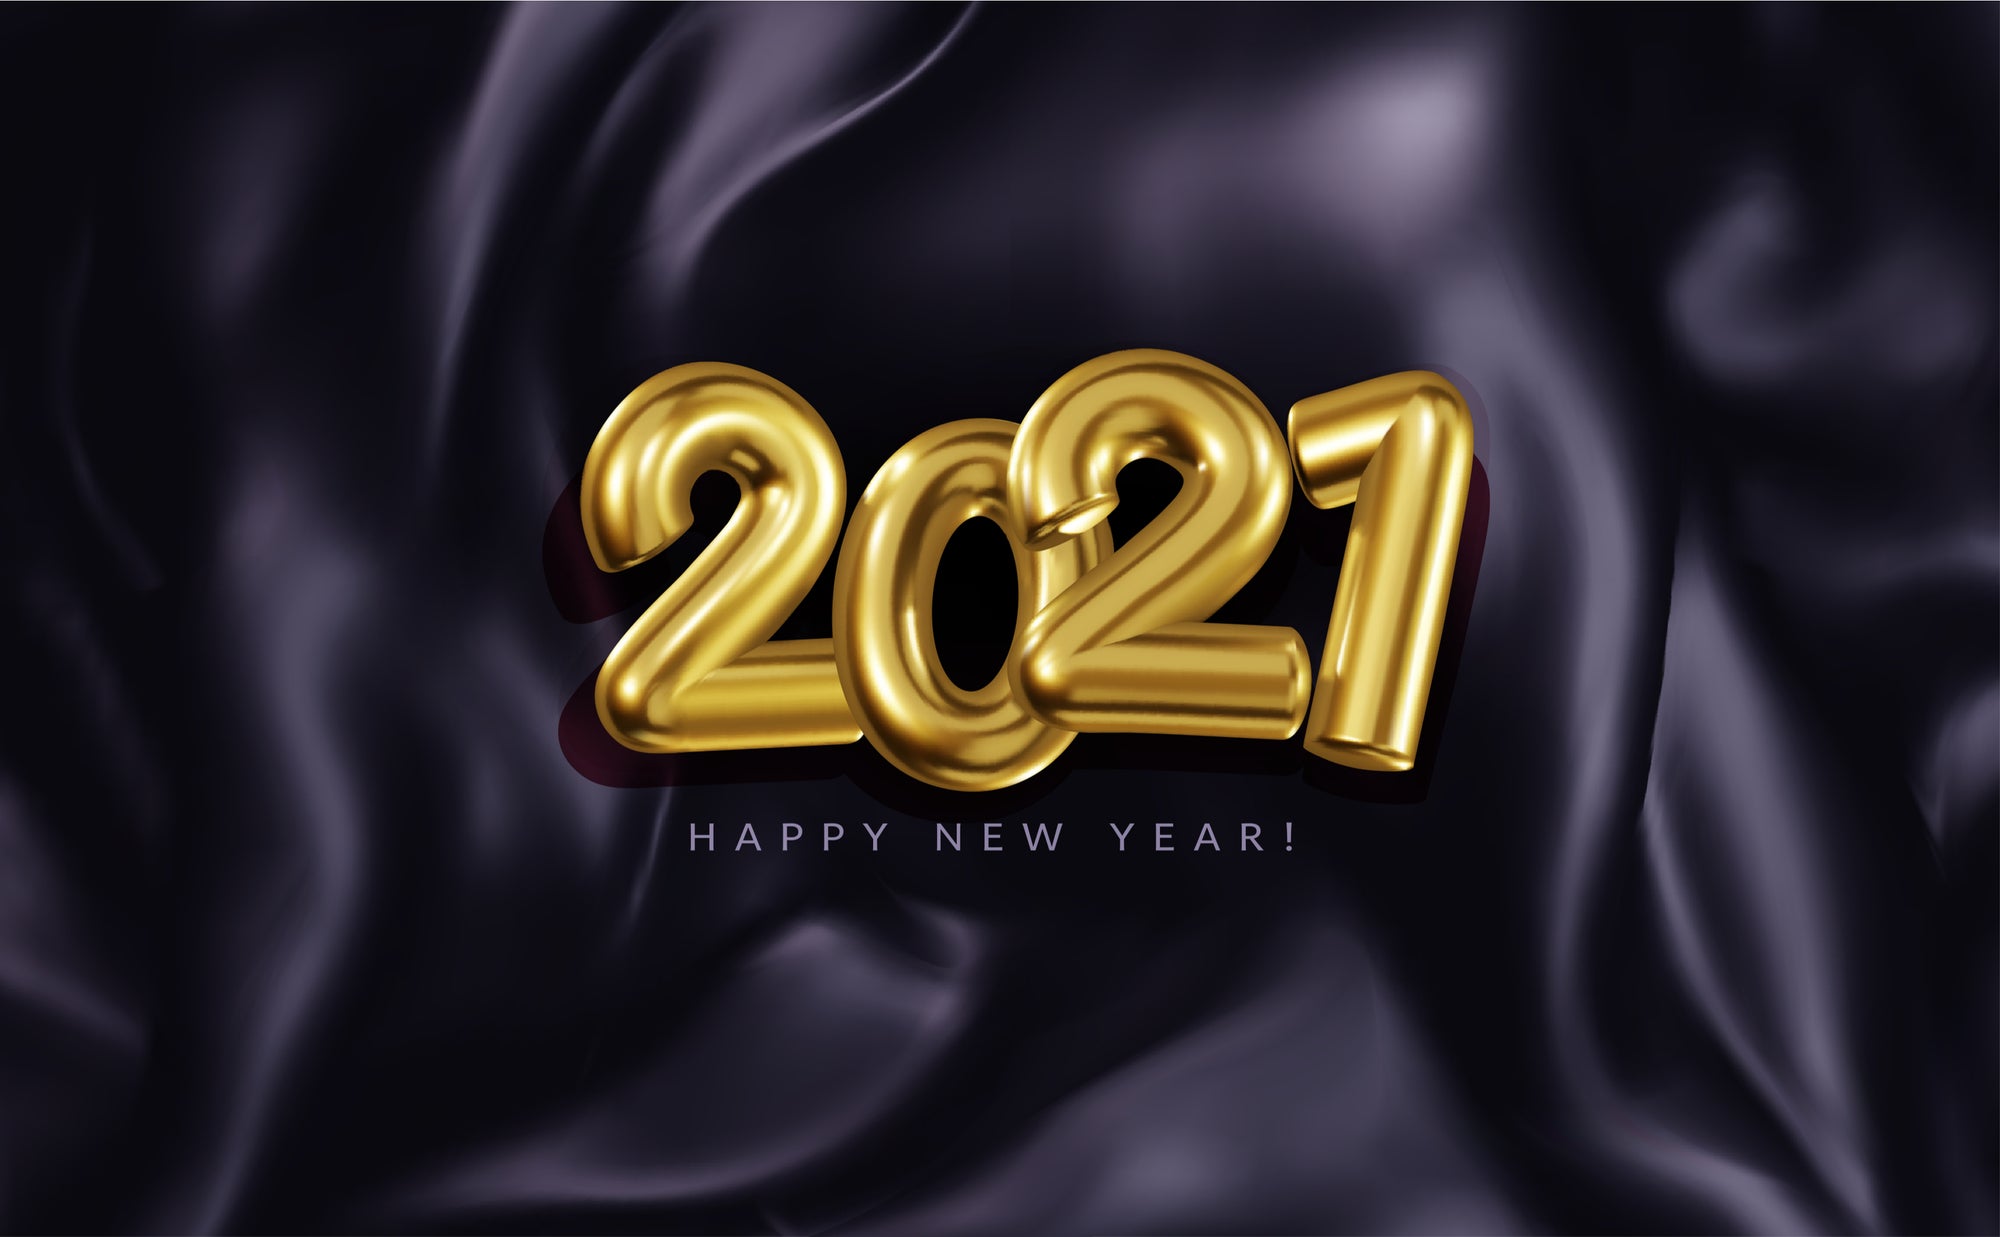 Welcome 2021 - Wishing Everyone A Better & Healthier Year!